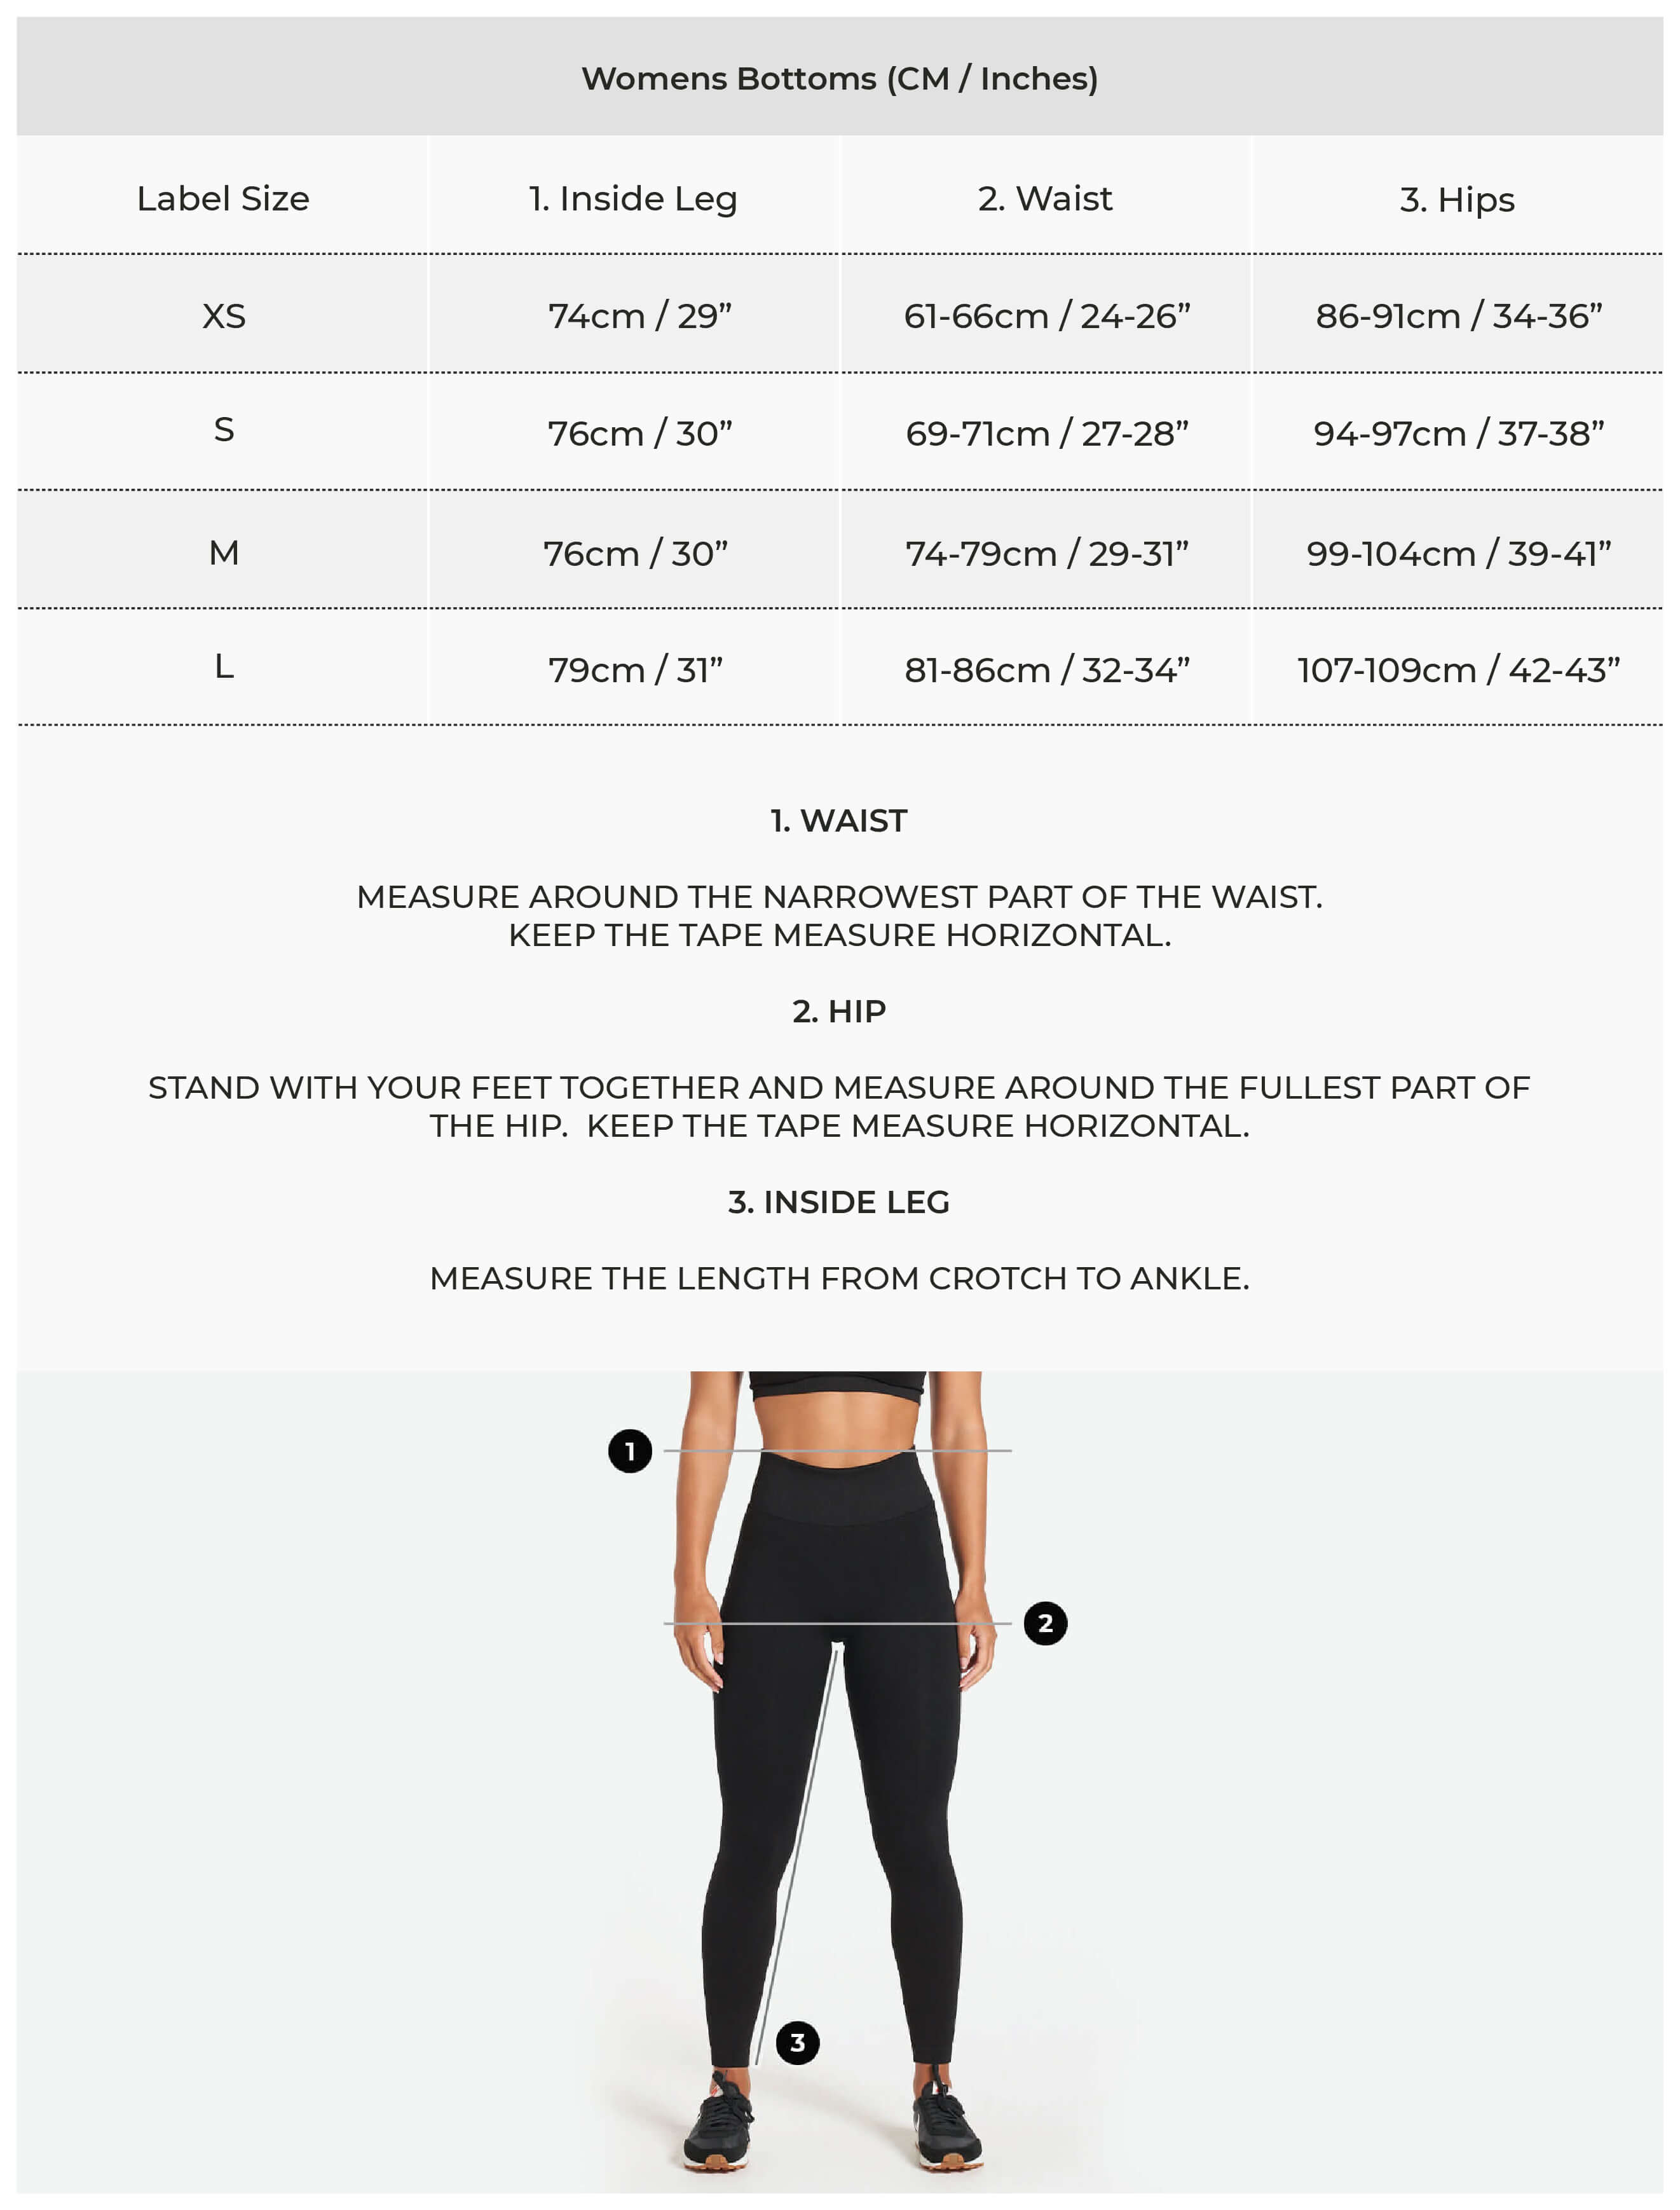 Sizing advice! This is on wmtm and I have the sweat collective discount  making this 25$. I'm usually a size 8-10 in the regular energy bras (8 is  snug but works). The